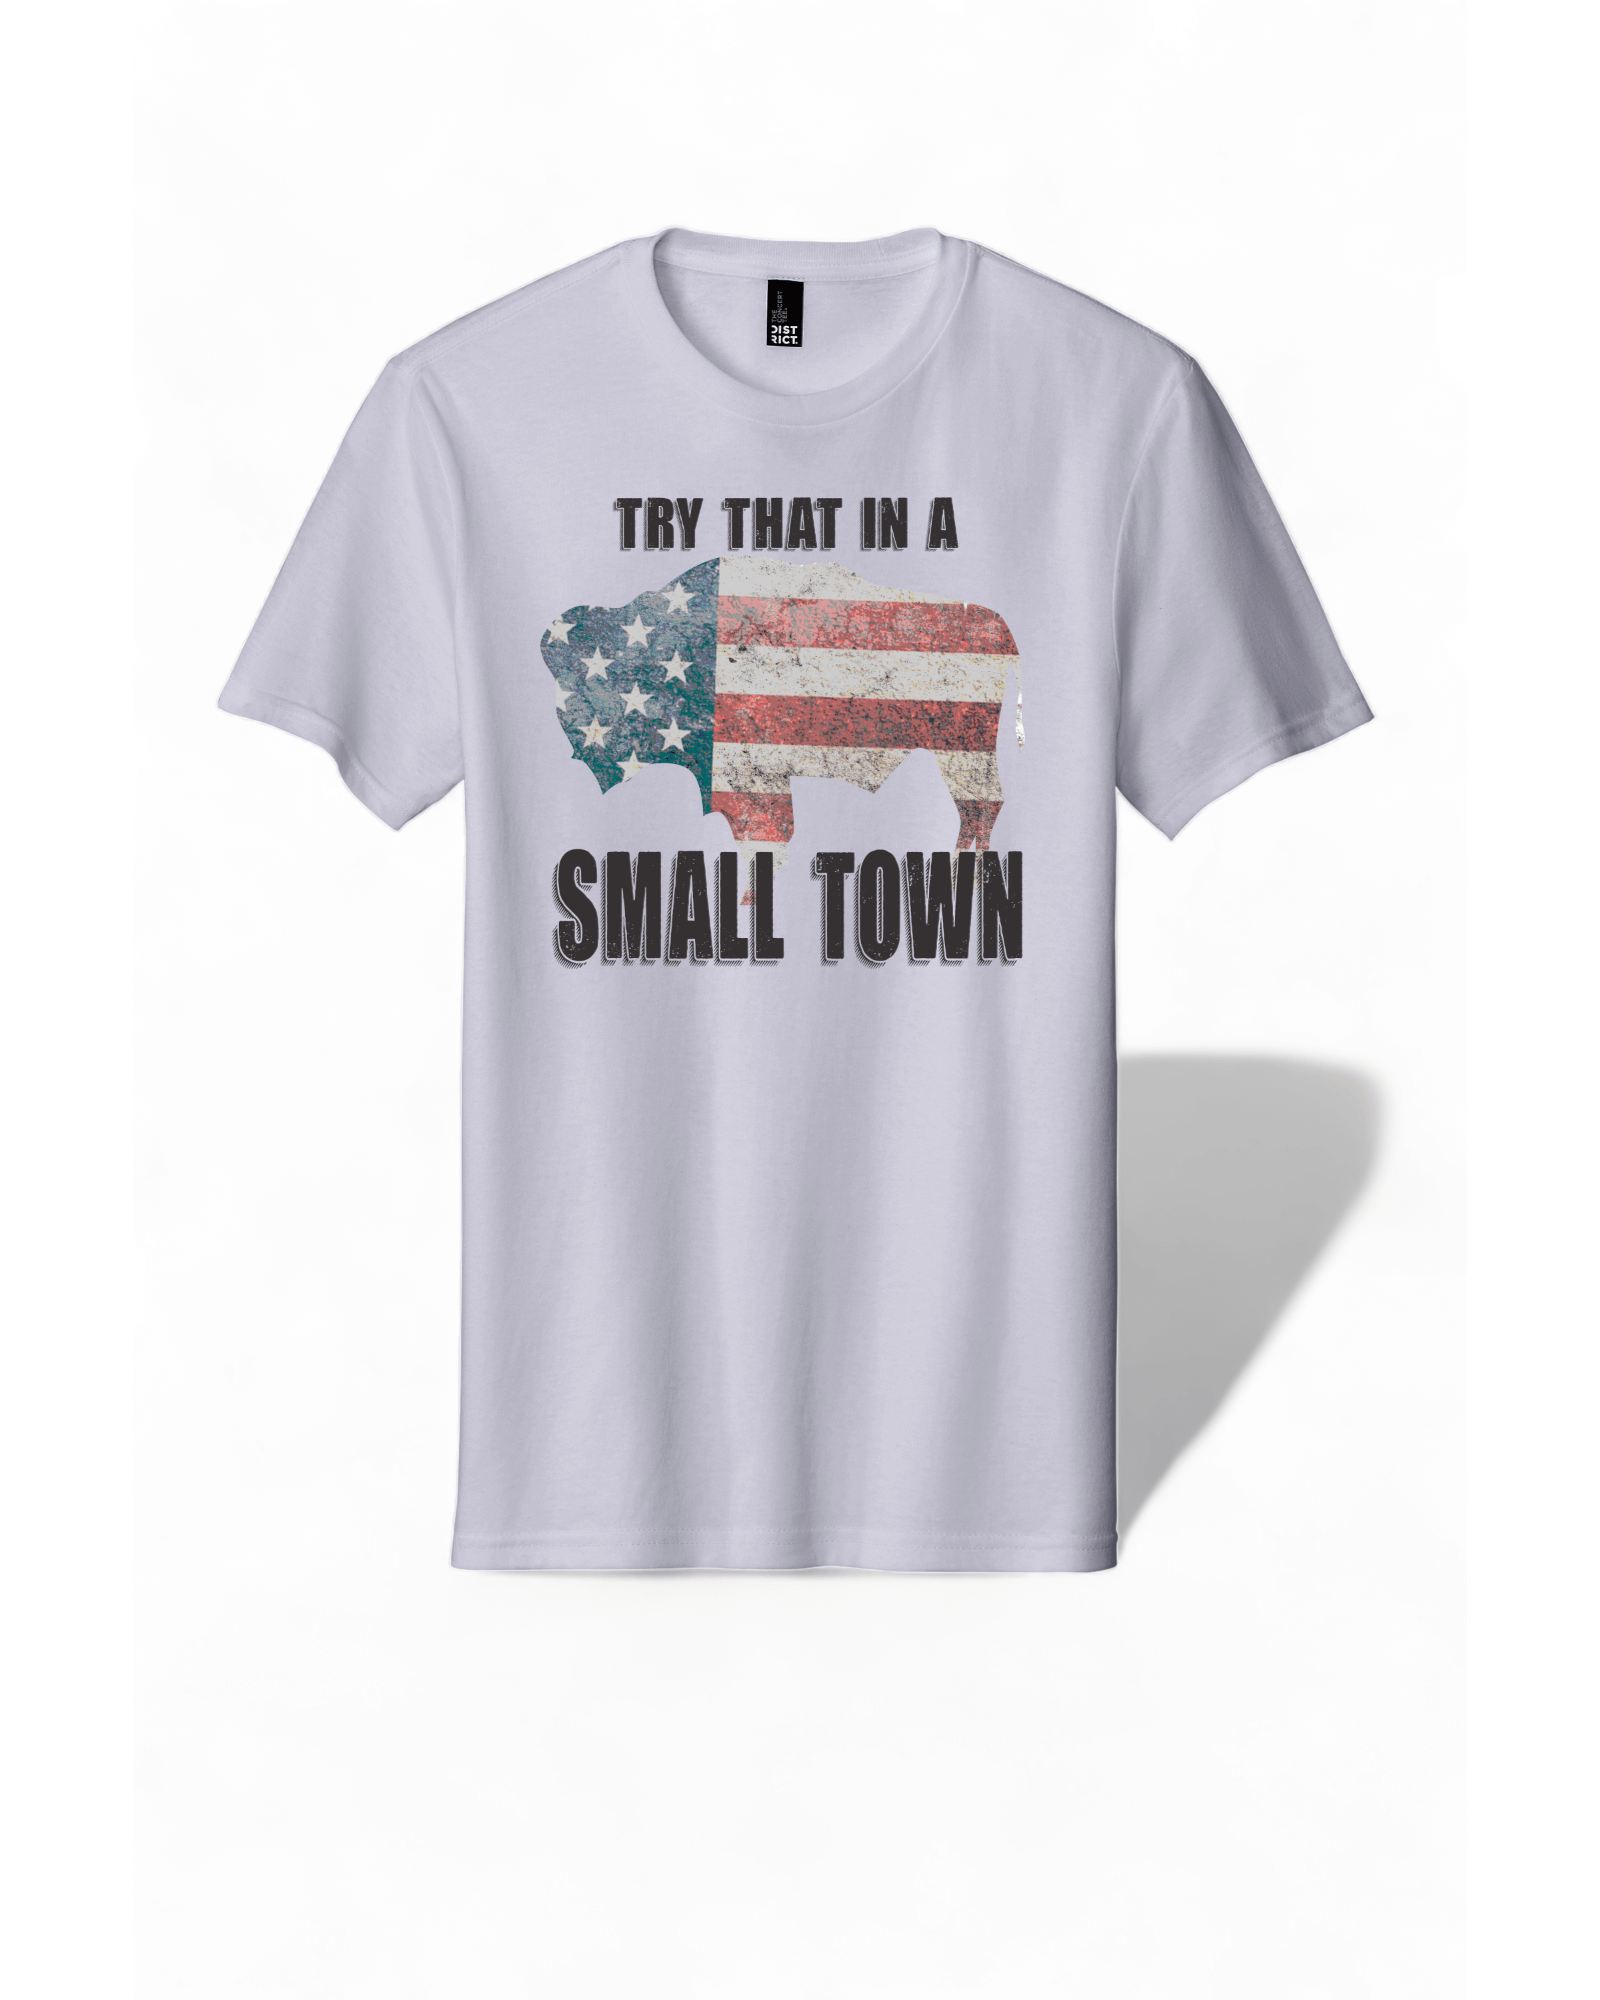 Try That in a Small Town Shirt